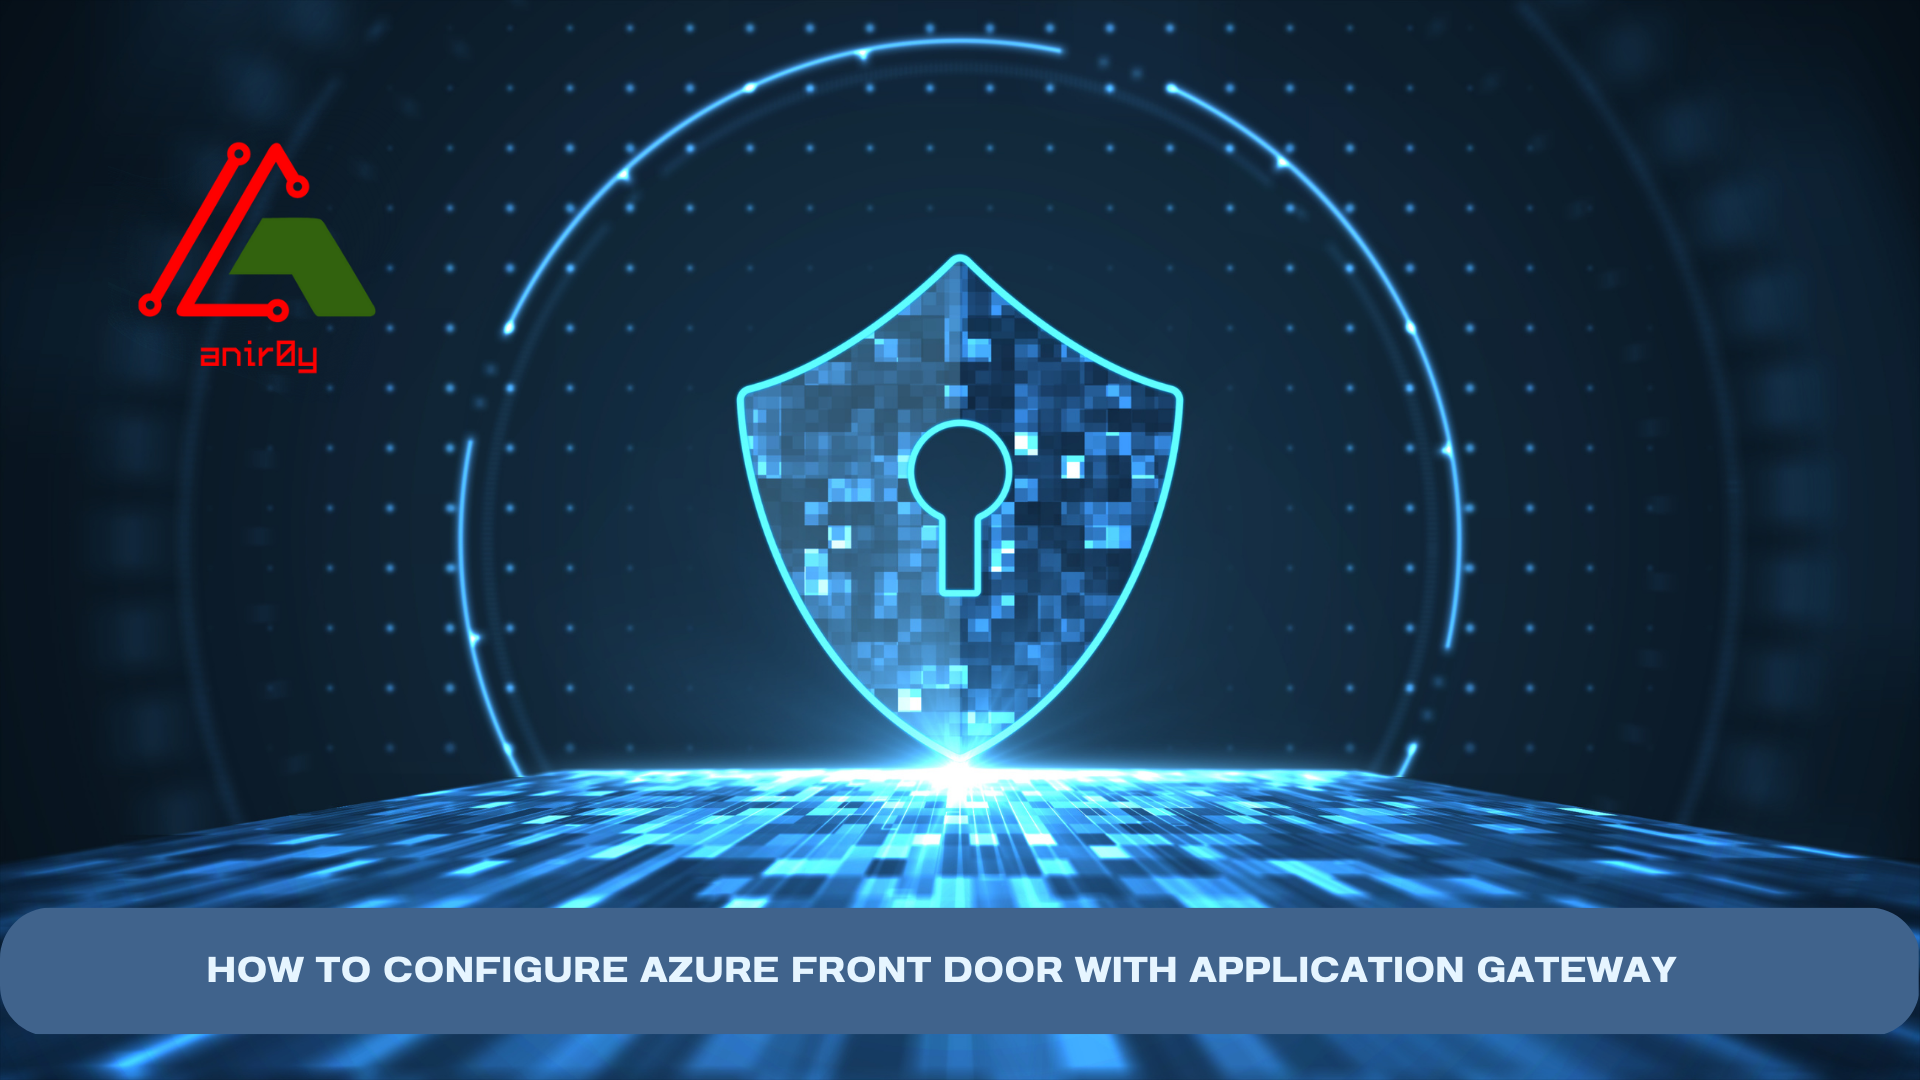 Optimizing Web Application Performance and Security With Azure Front Door and Application Gateway